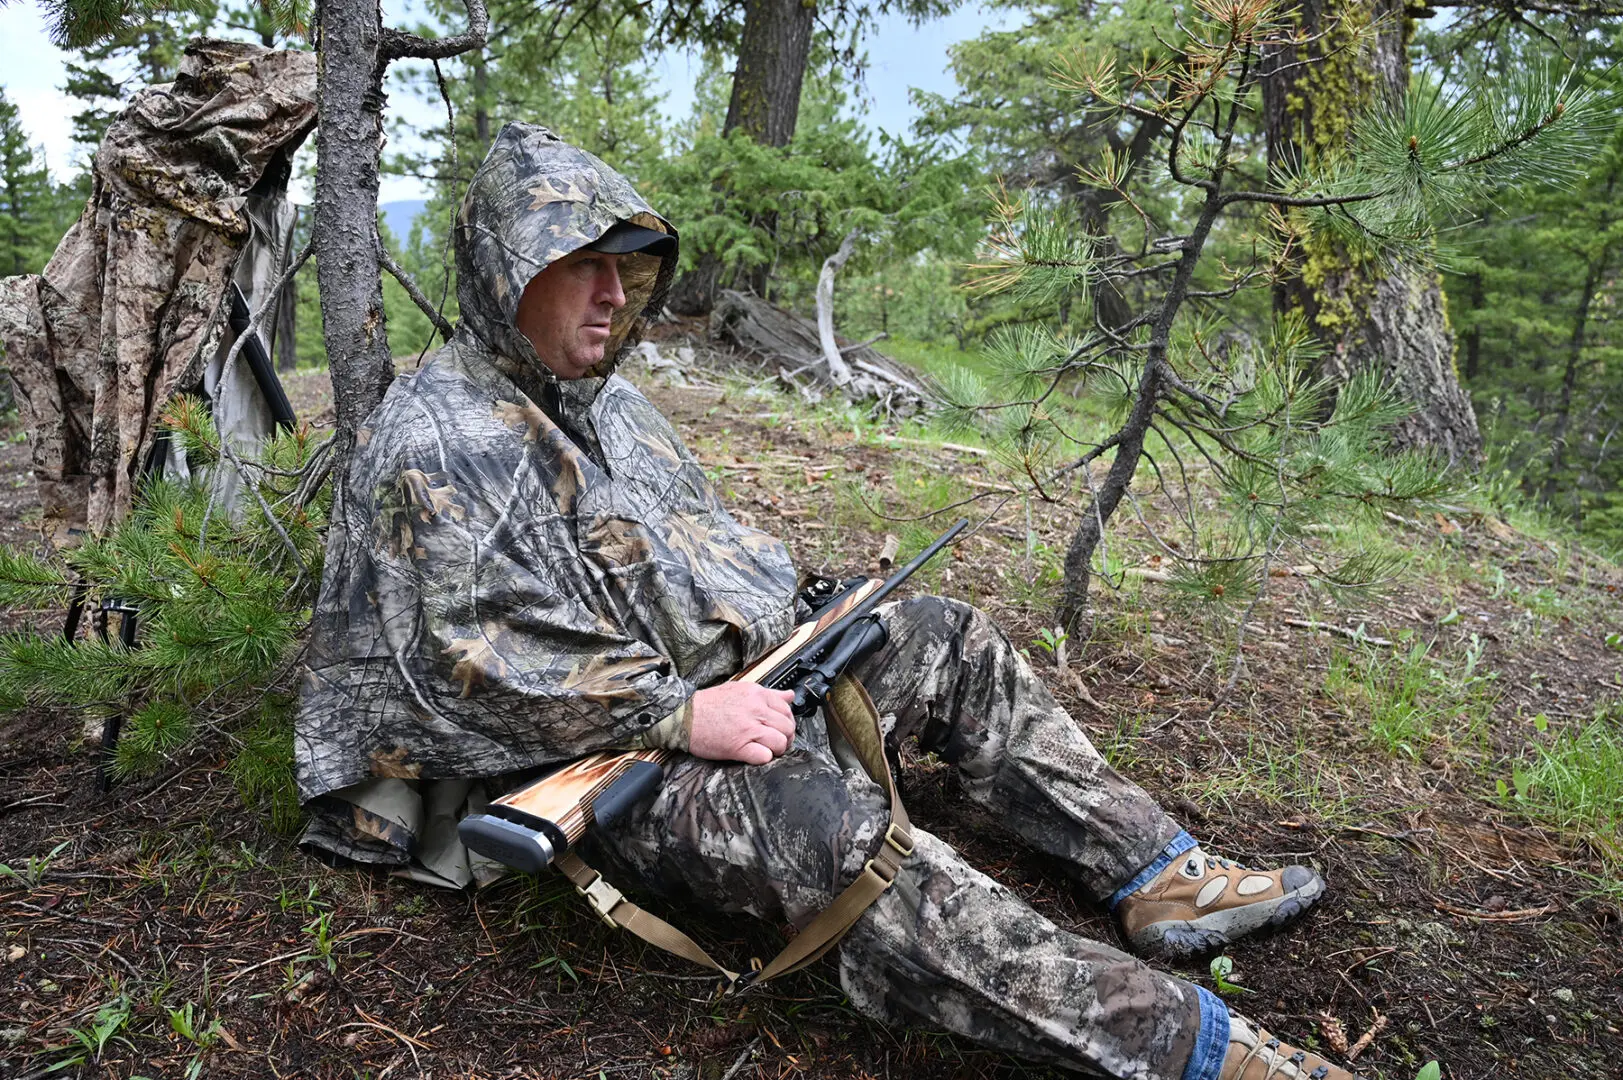 A man in camouflage sitting on the ground.